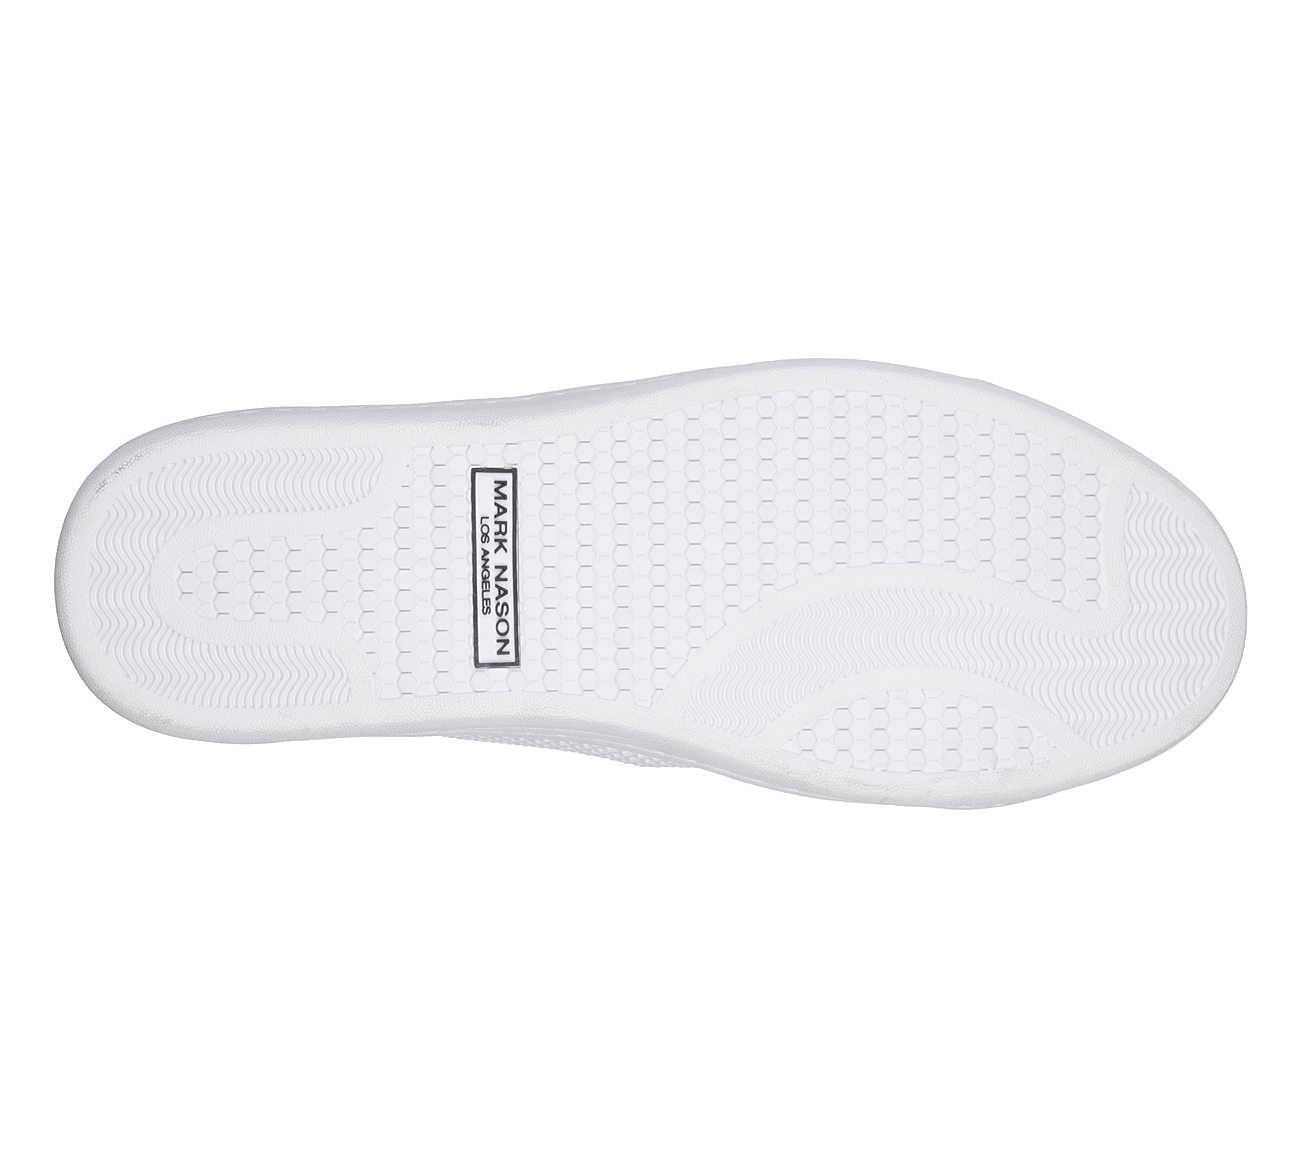 CLASSIC CUP - BRYSON, WHITE BLACK Footwear Bottom View